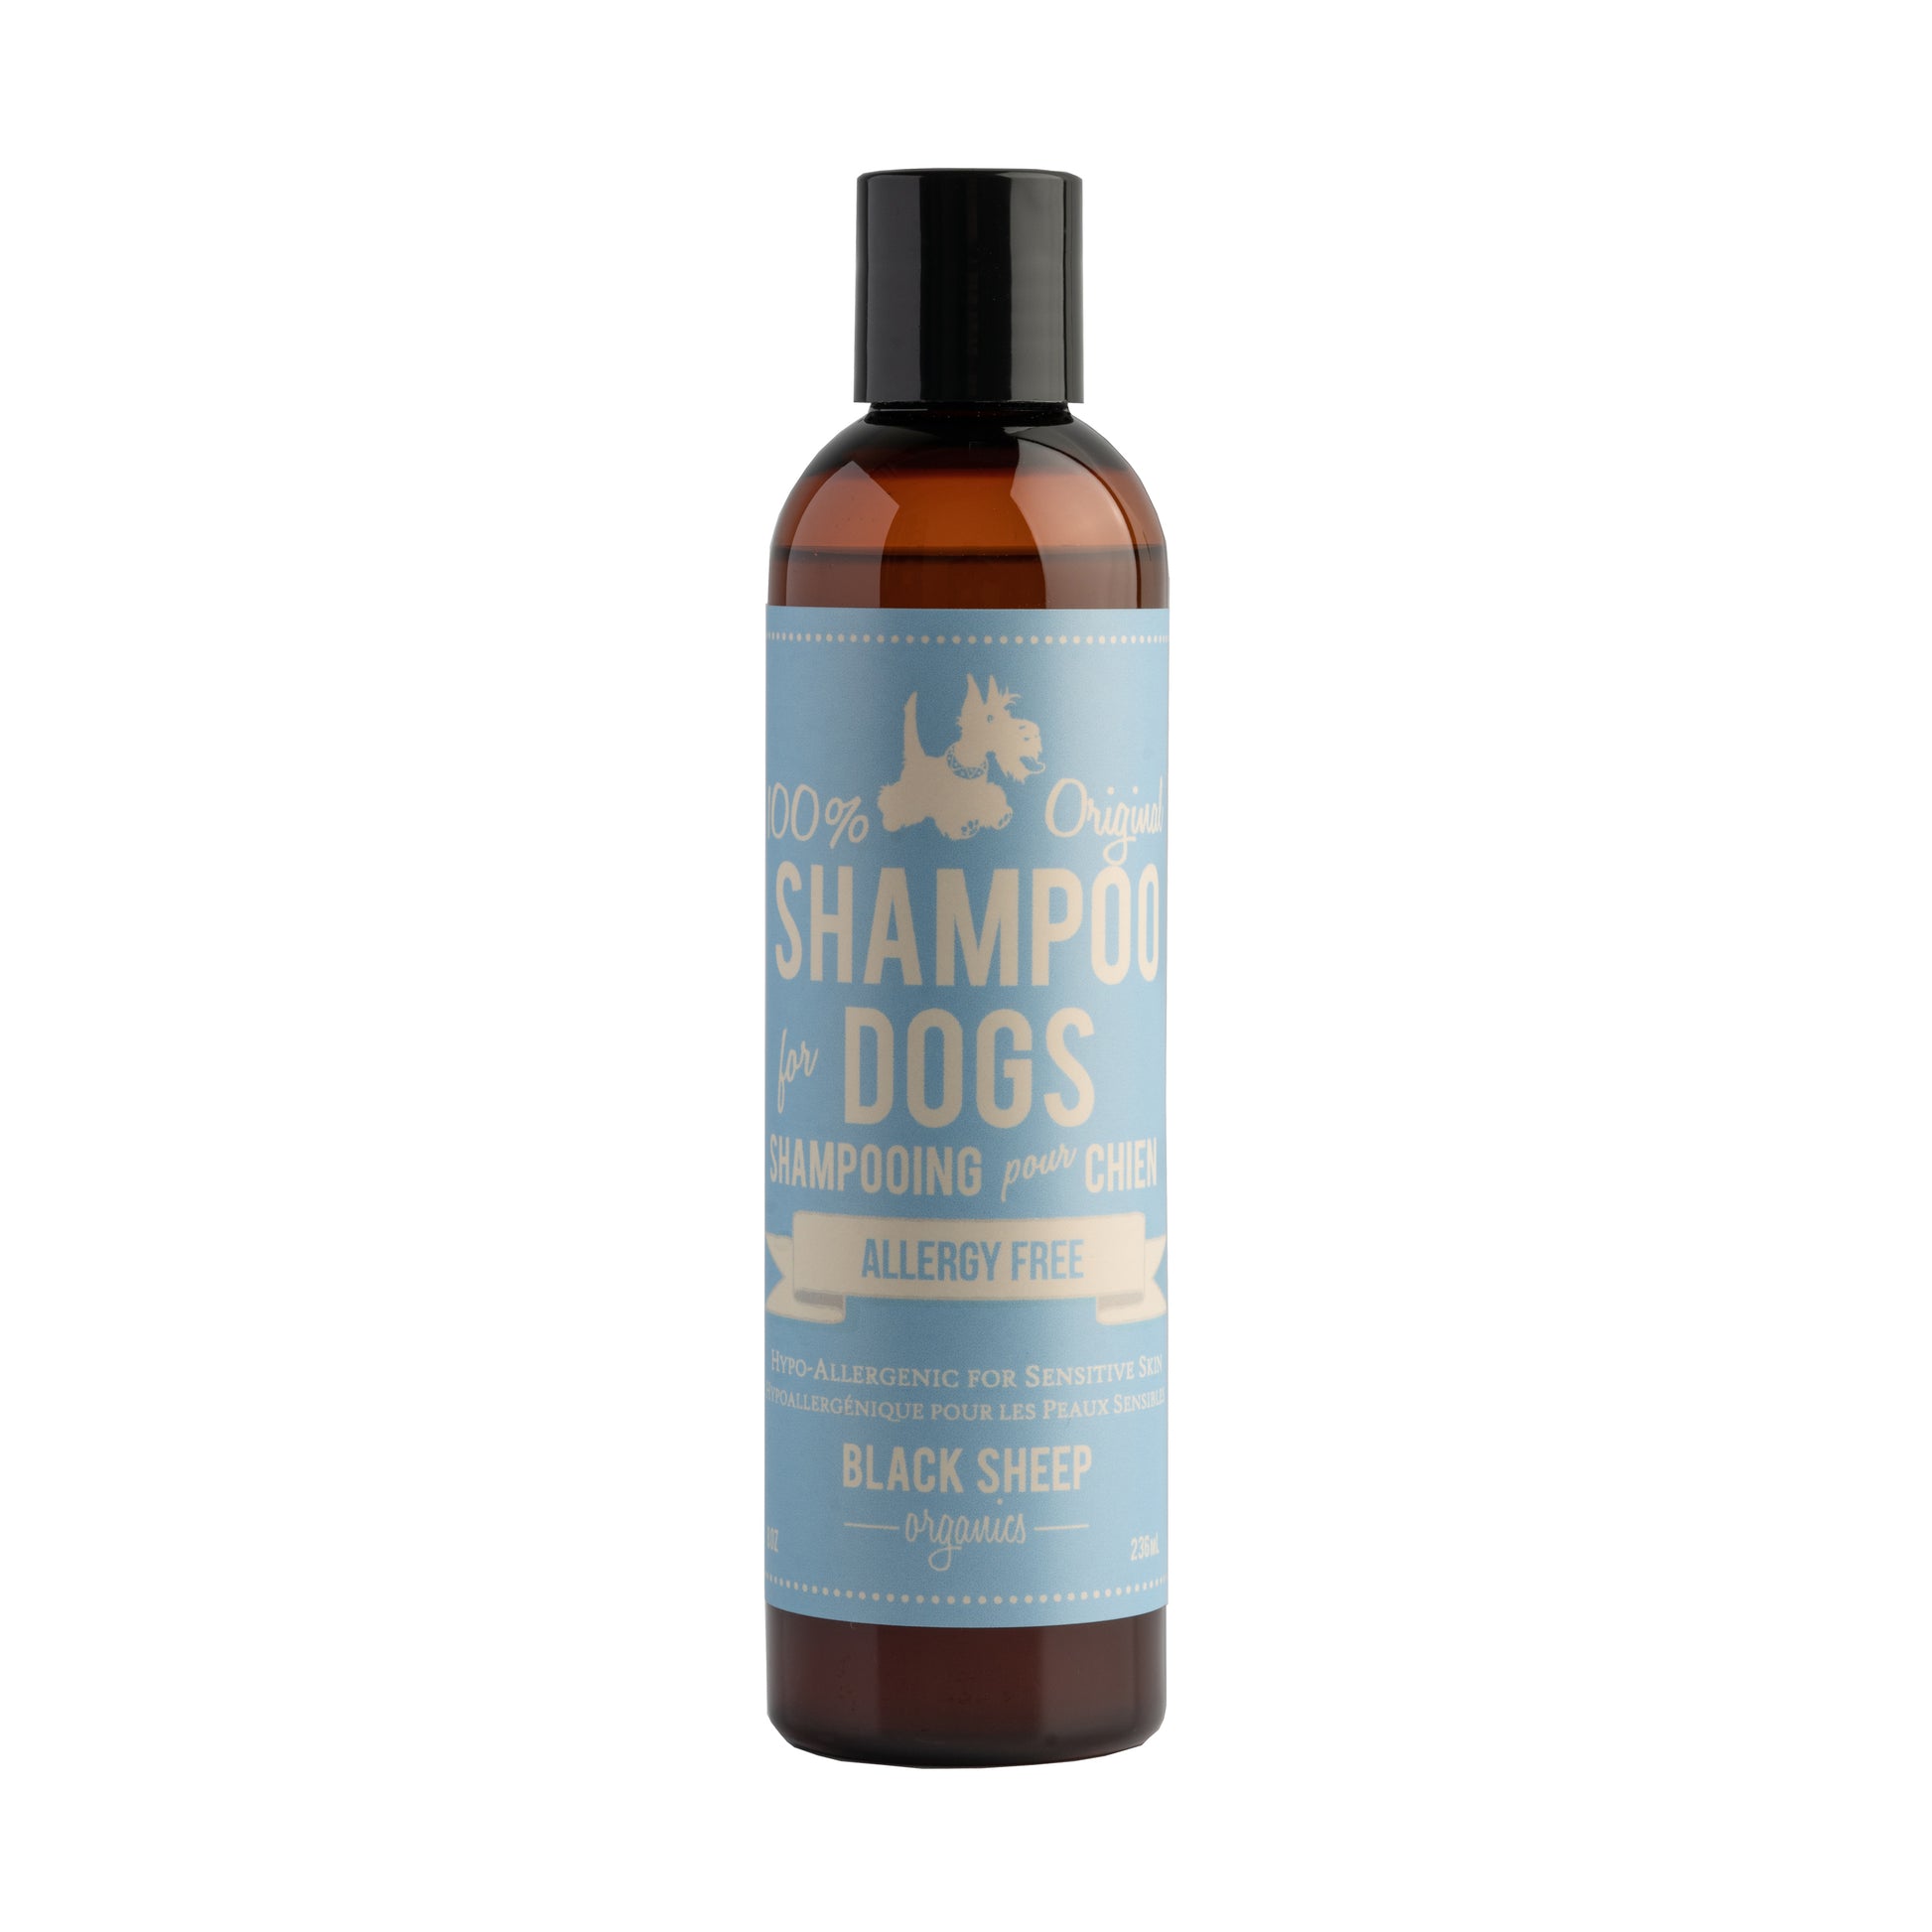 An allergy-free organic dog shampoo that helps dogs with sensitive skin.